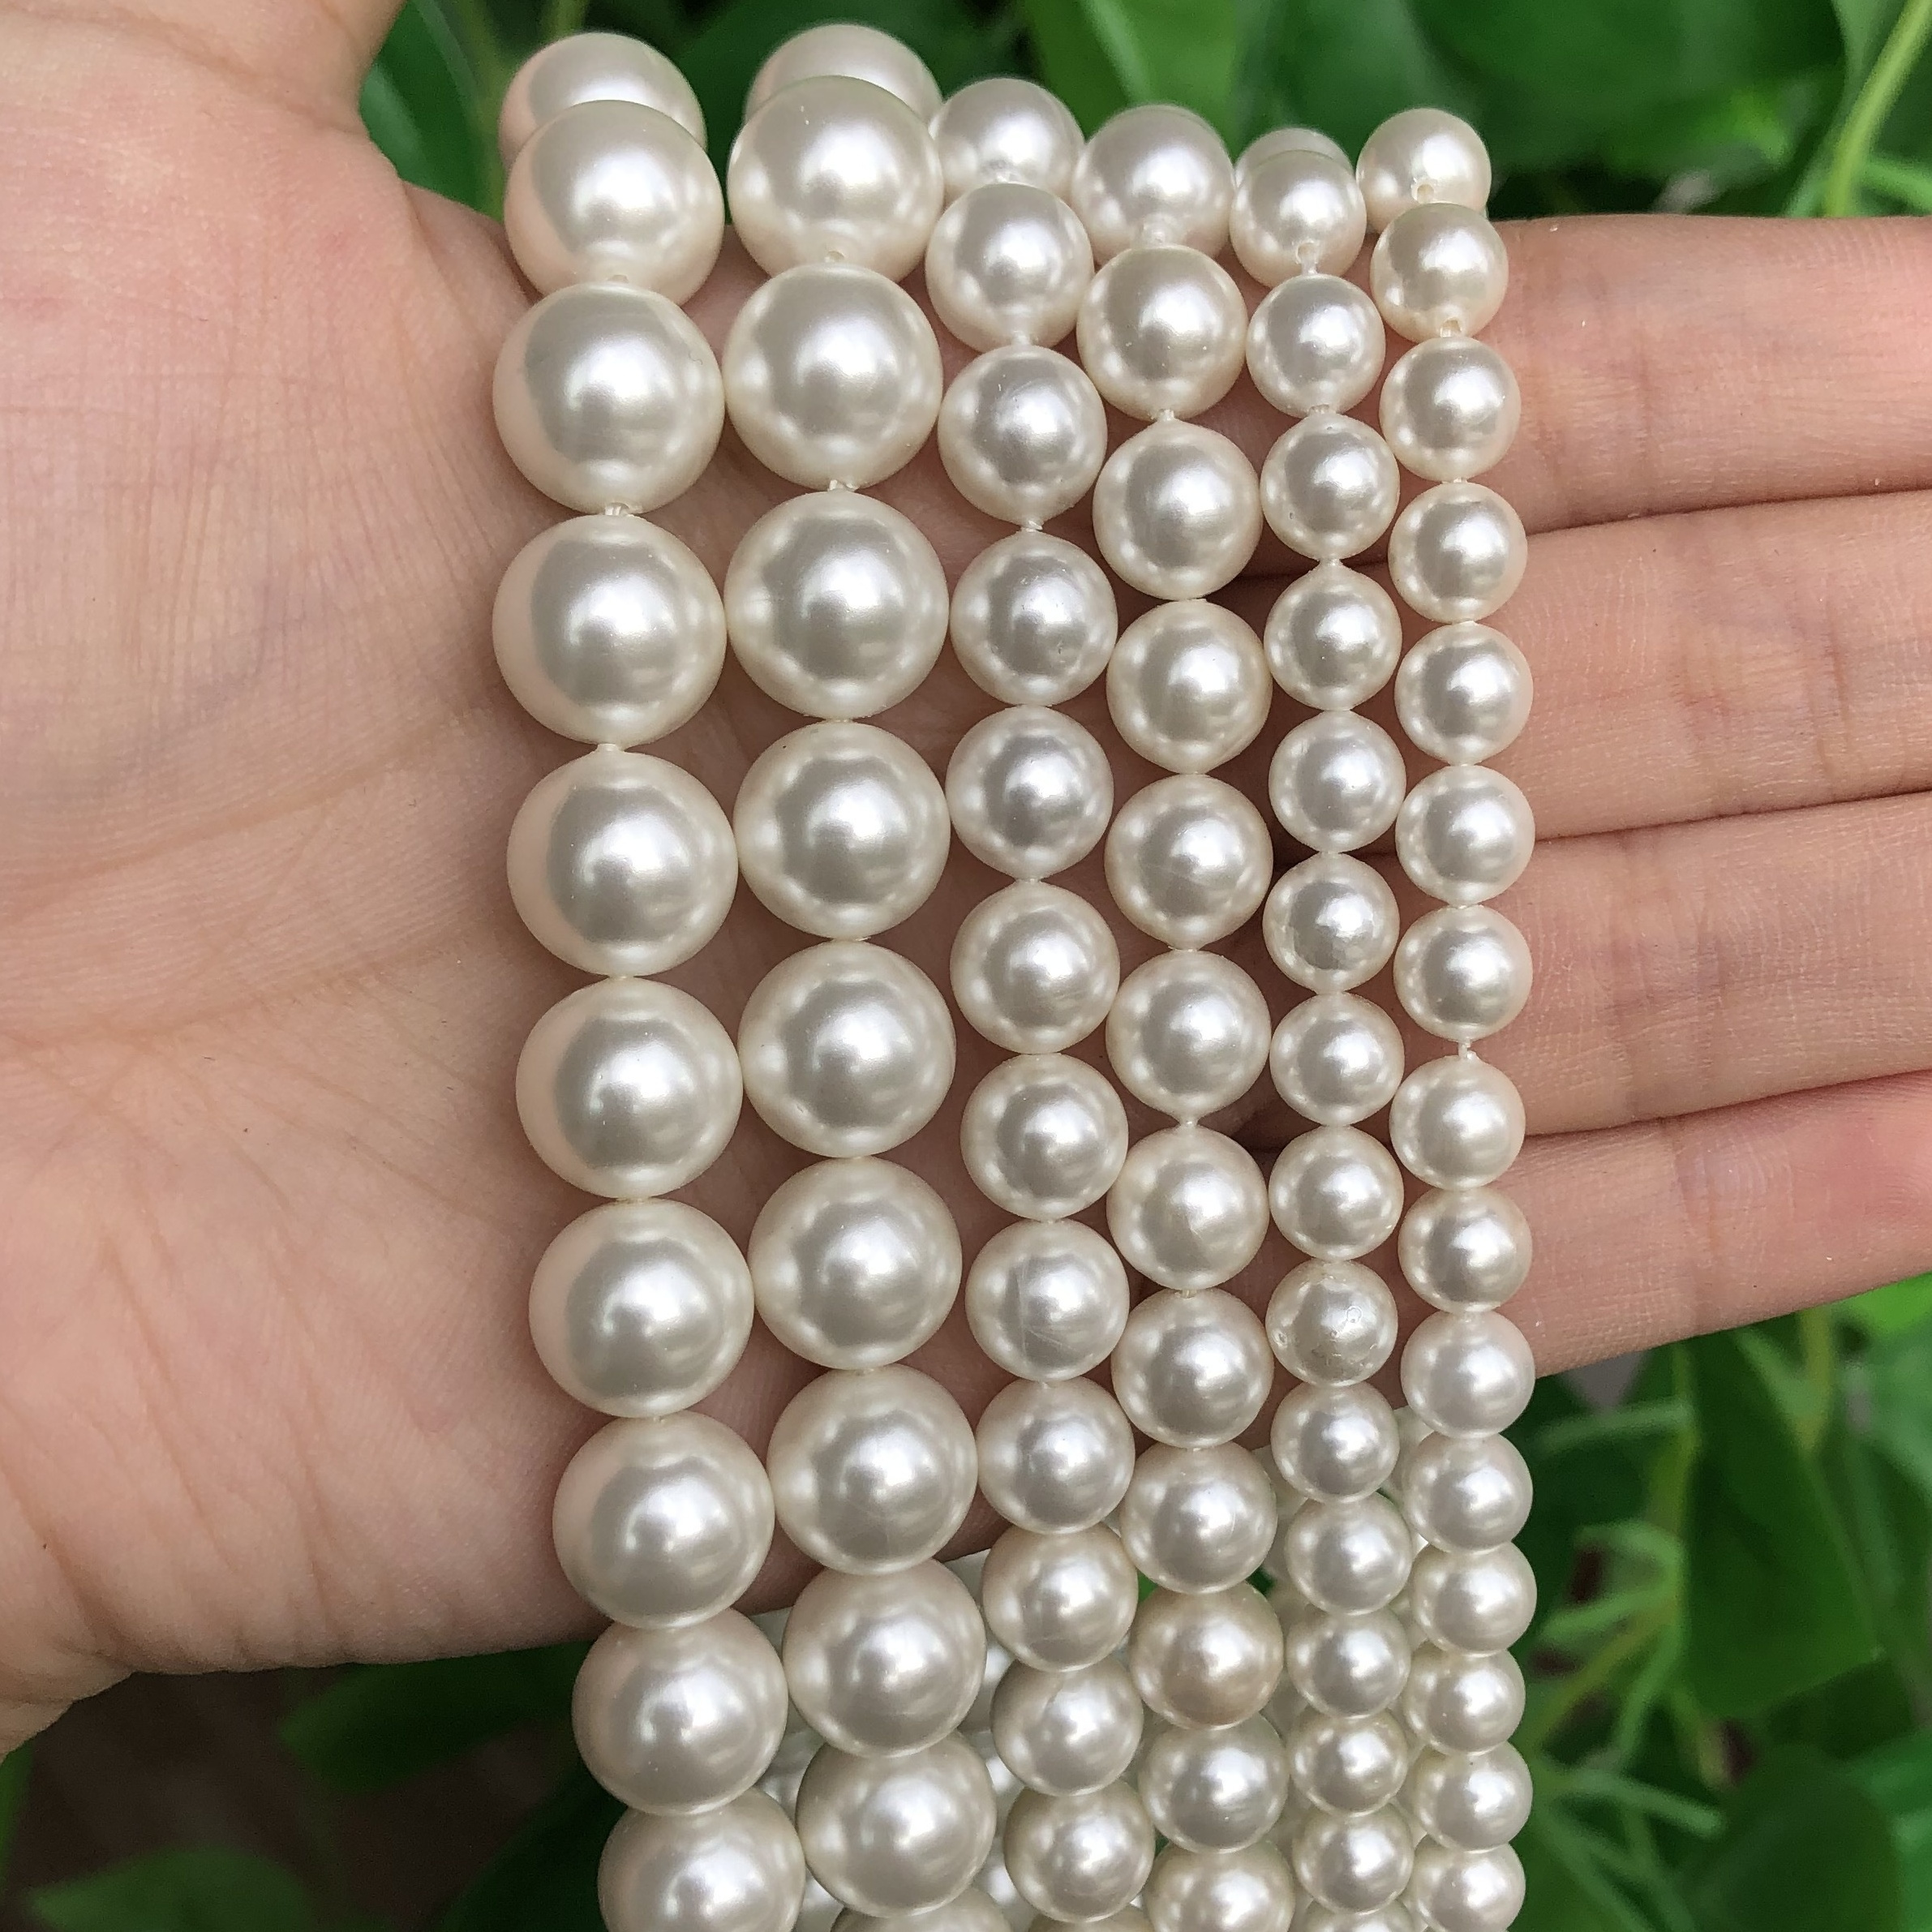 

Natural White Mother Of Pearl Shell Beads Round Shells Loose Beads For Jewelry Making Diy Bracelet Necklace Accessories 2-10 Mm 15 In